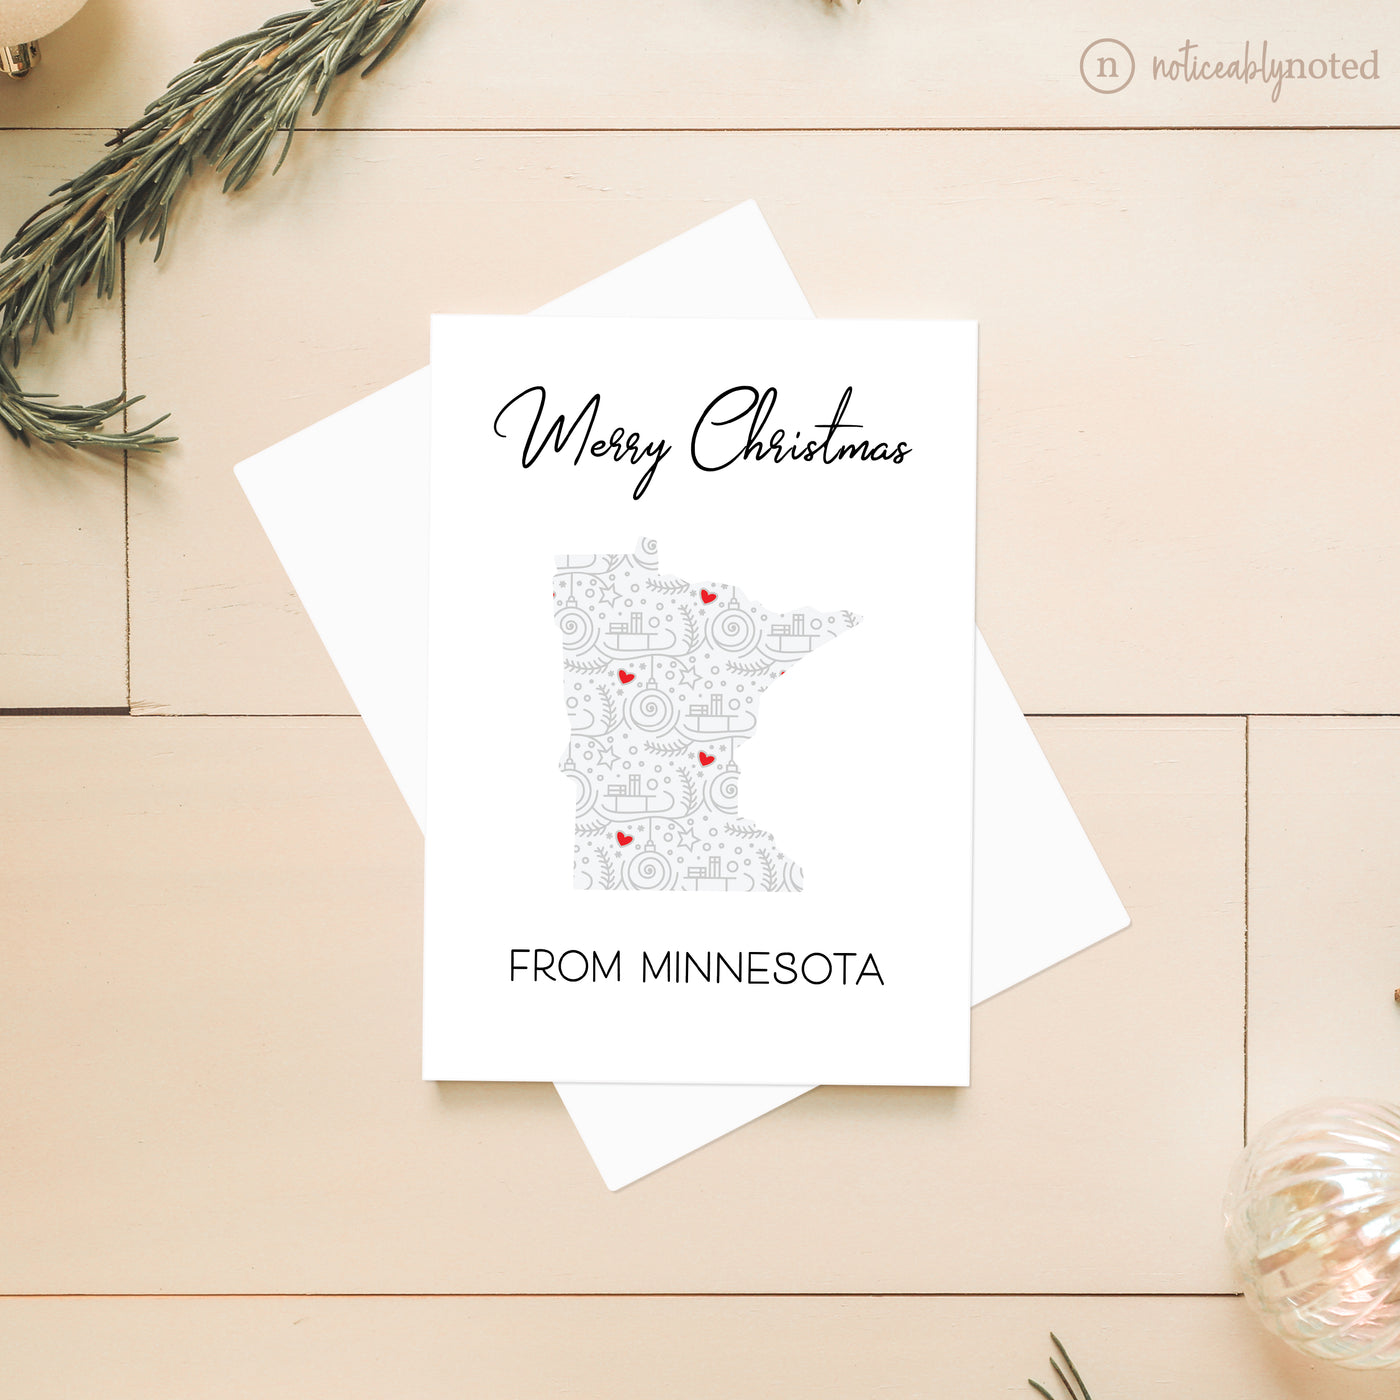 Minnesota Christmas Cards | Noticeably Noted